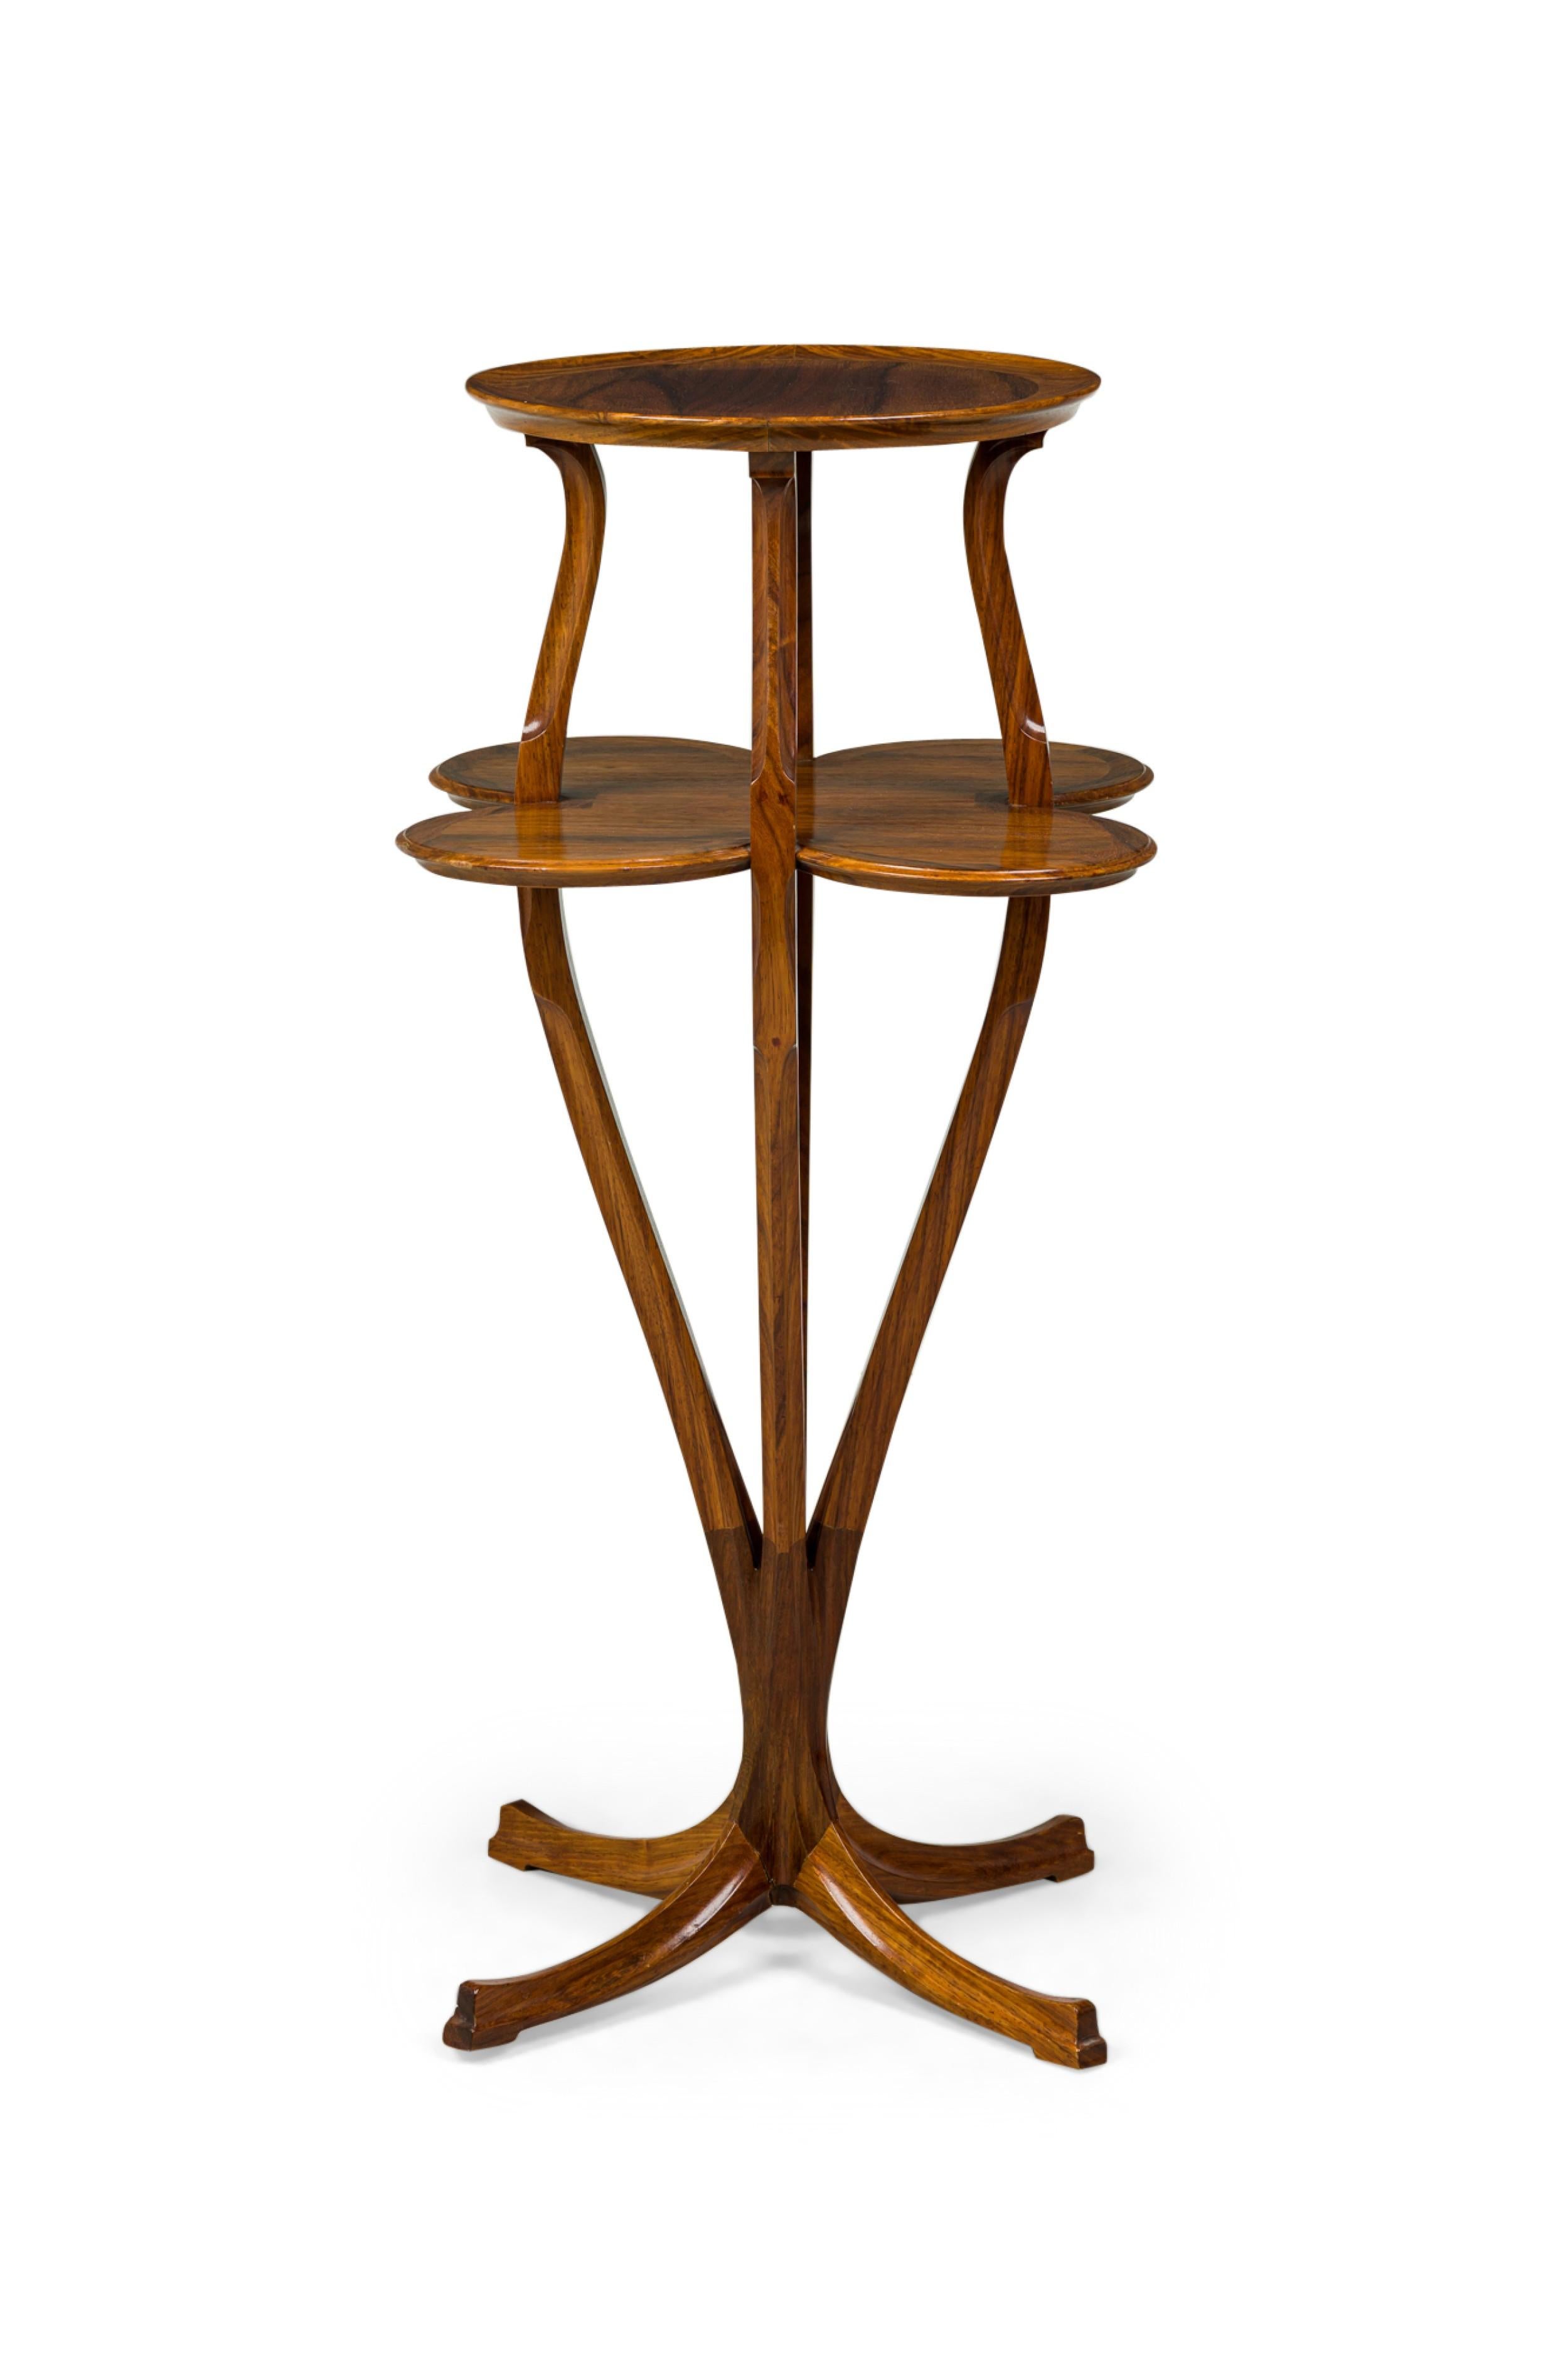 French Art Nouveau two-tier pedestal table with a lower shelf in a clover shape supporting a circular upper tier, connected by carved supports and resting on a carved 4 leg pedestal base. (TONY SELMERSHEIM)
